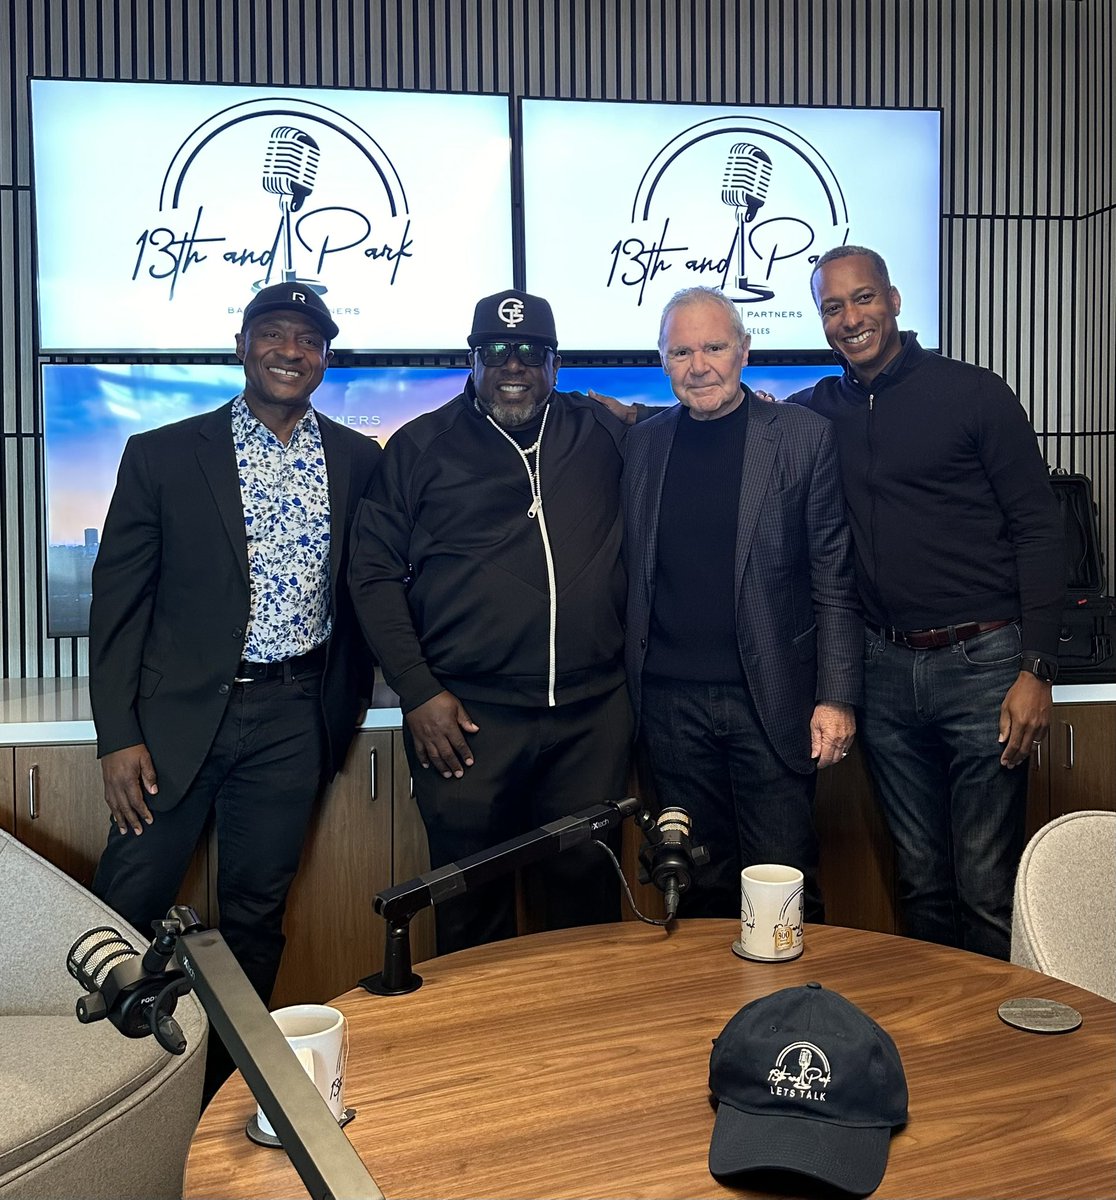 We had the pleasure of hosting @CedEntertainer in our LA office yesterday. We had a blast with one of the best in the game!